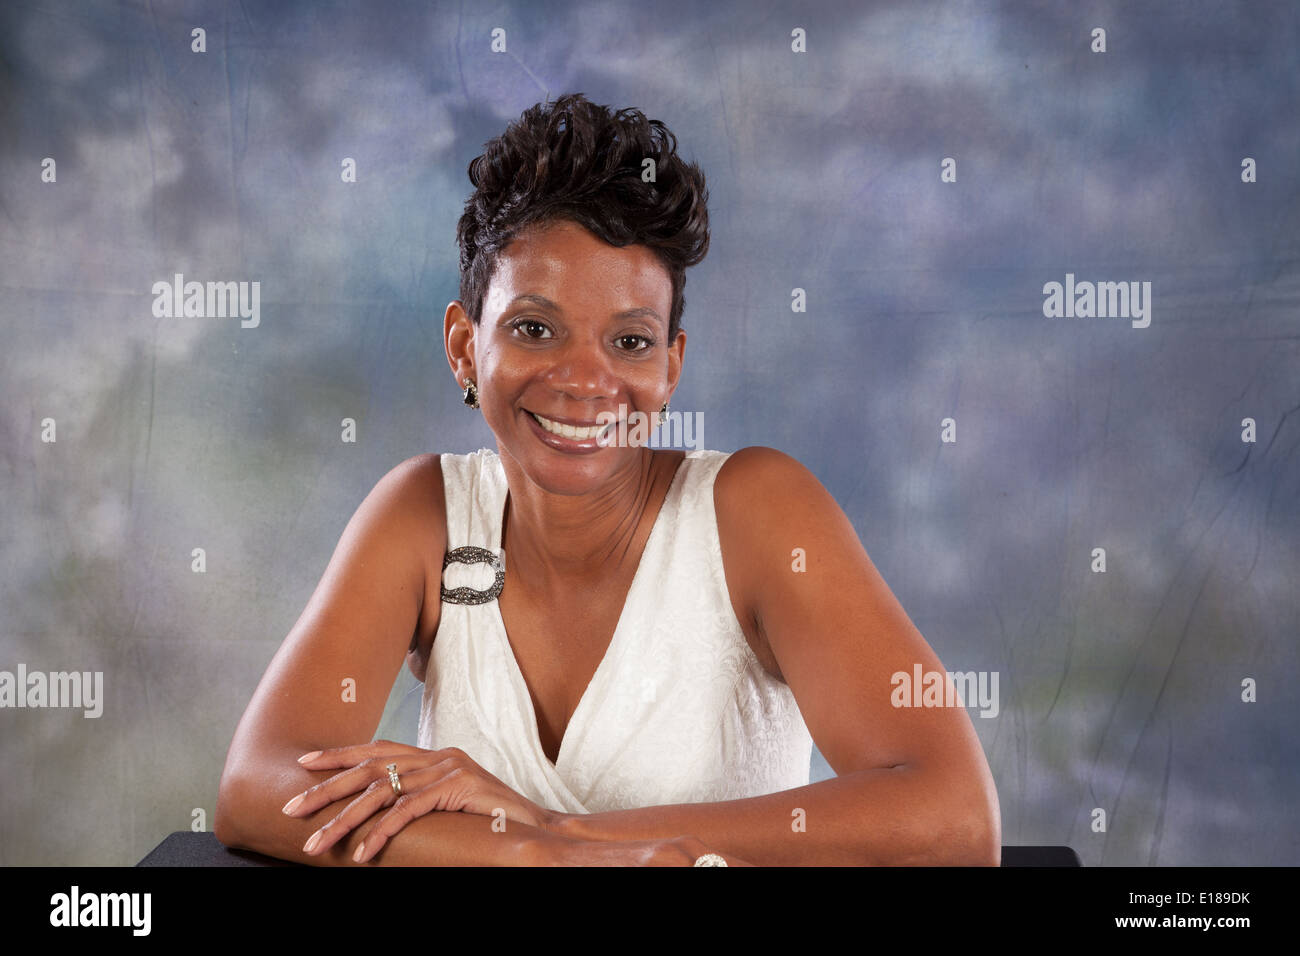 Pretty black woman in white dress, sitting with her arms on a table, smiling at the camera with pleasure and joy Stock Photo